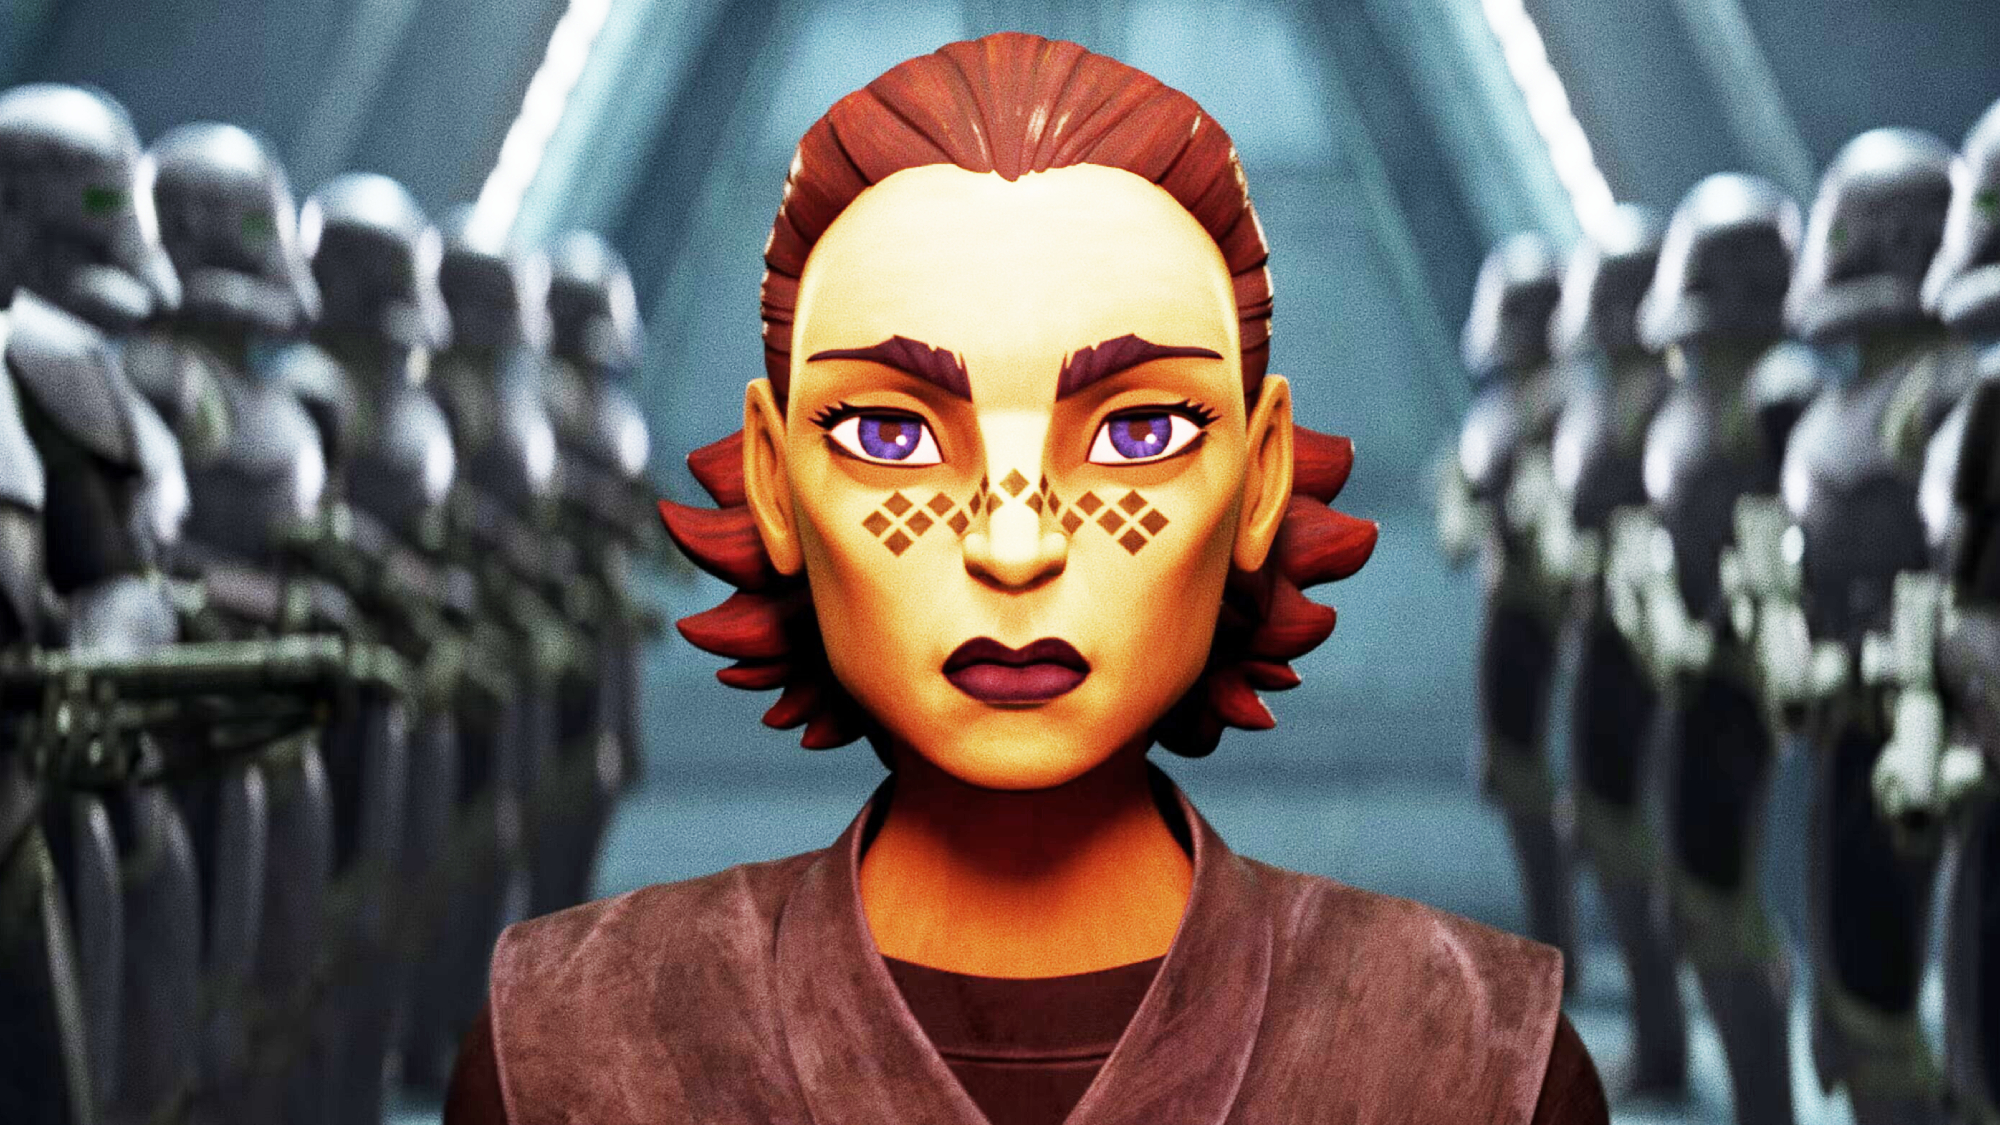 Barriss Offee in Tales of the Empire Star Wars series